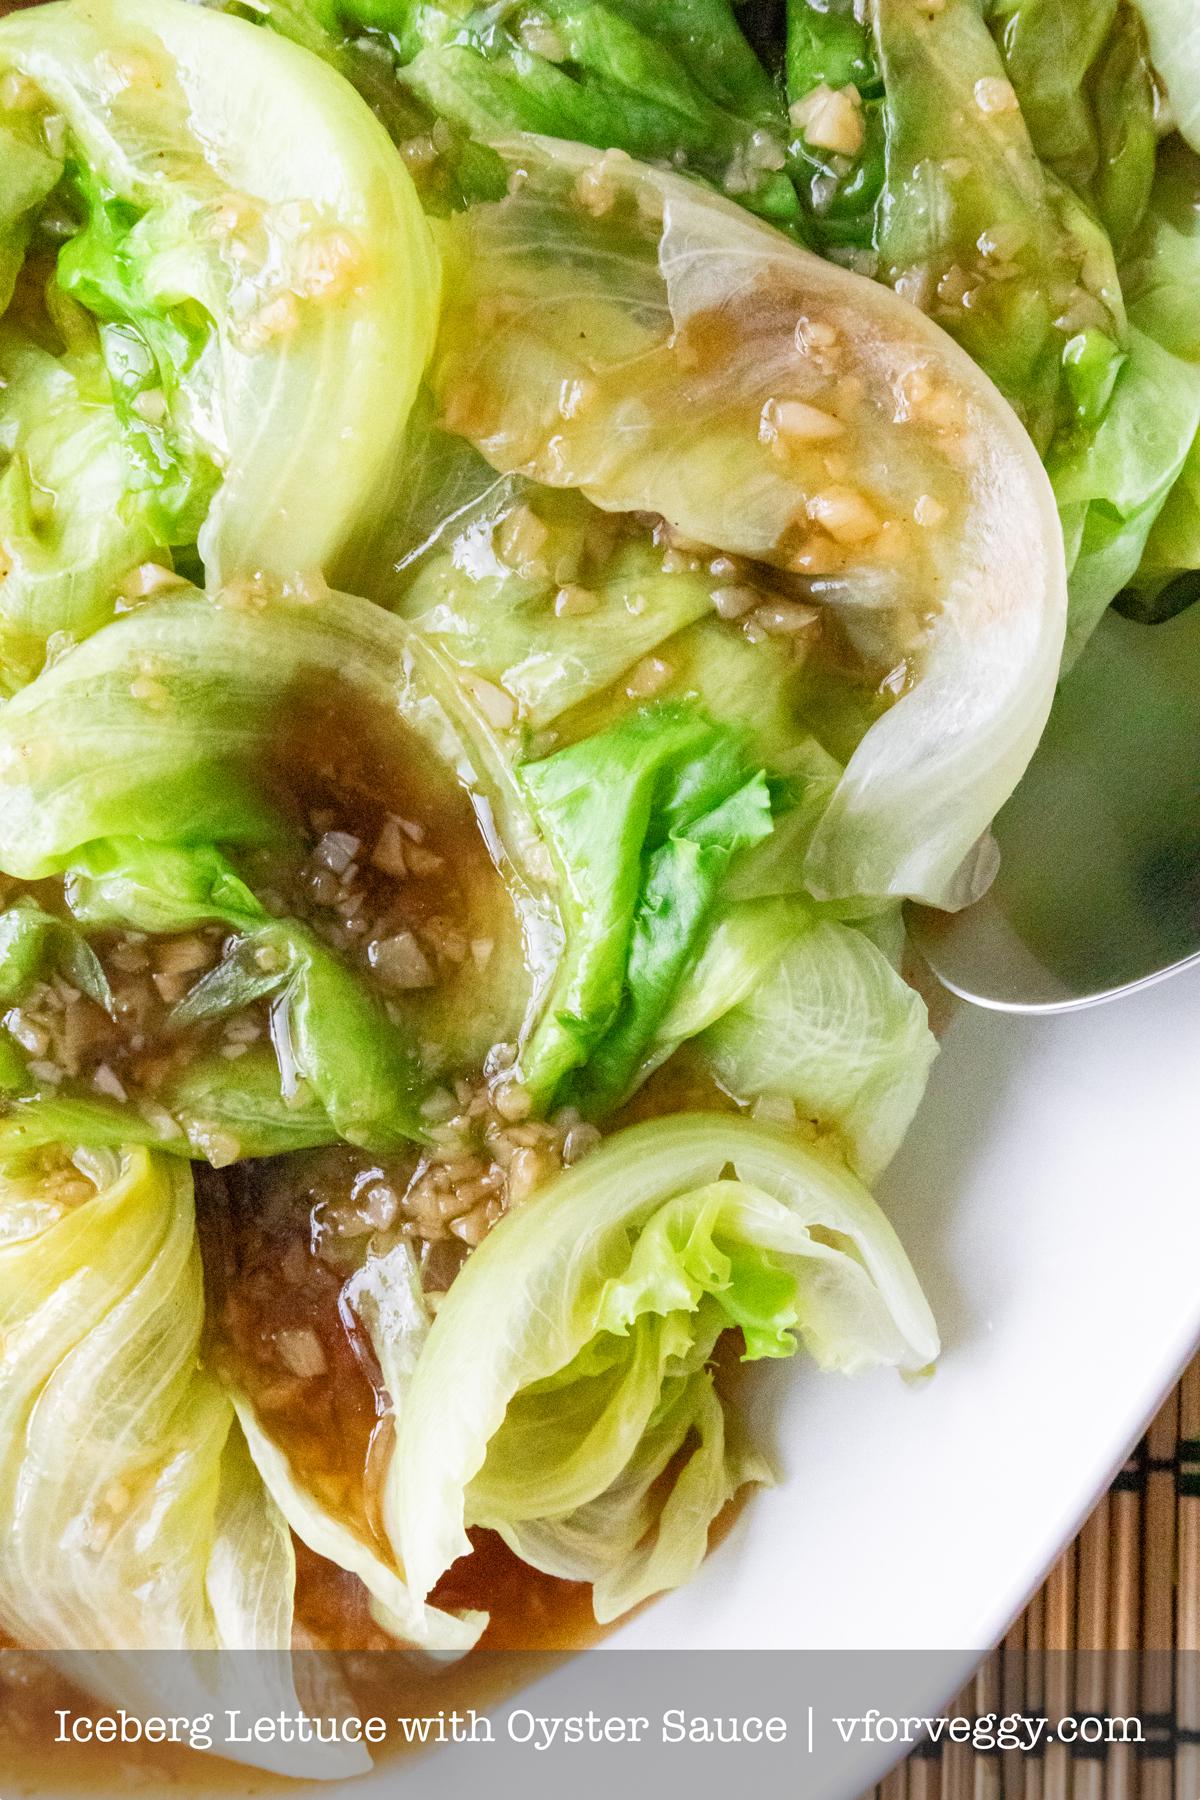 Iceberg Lettuce with Oyster Sauce.